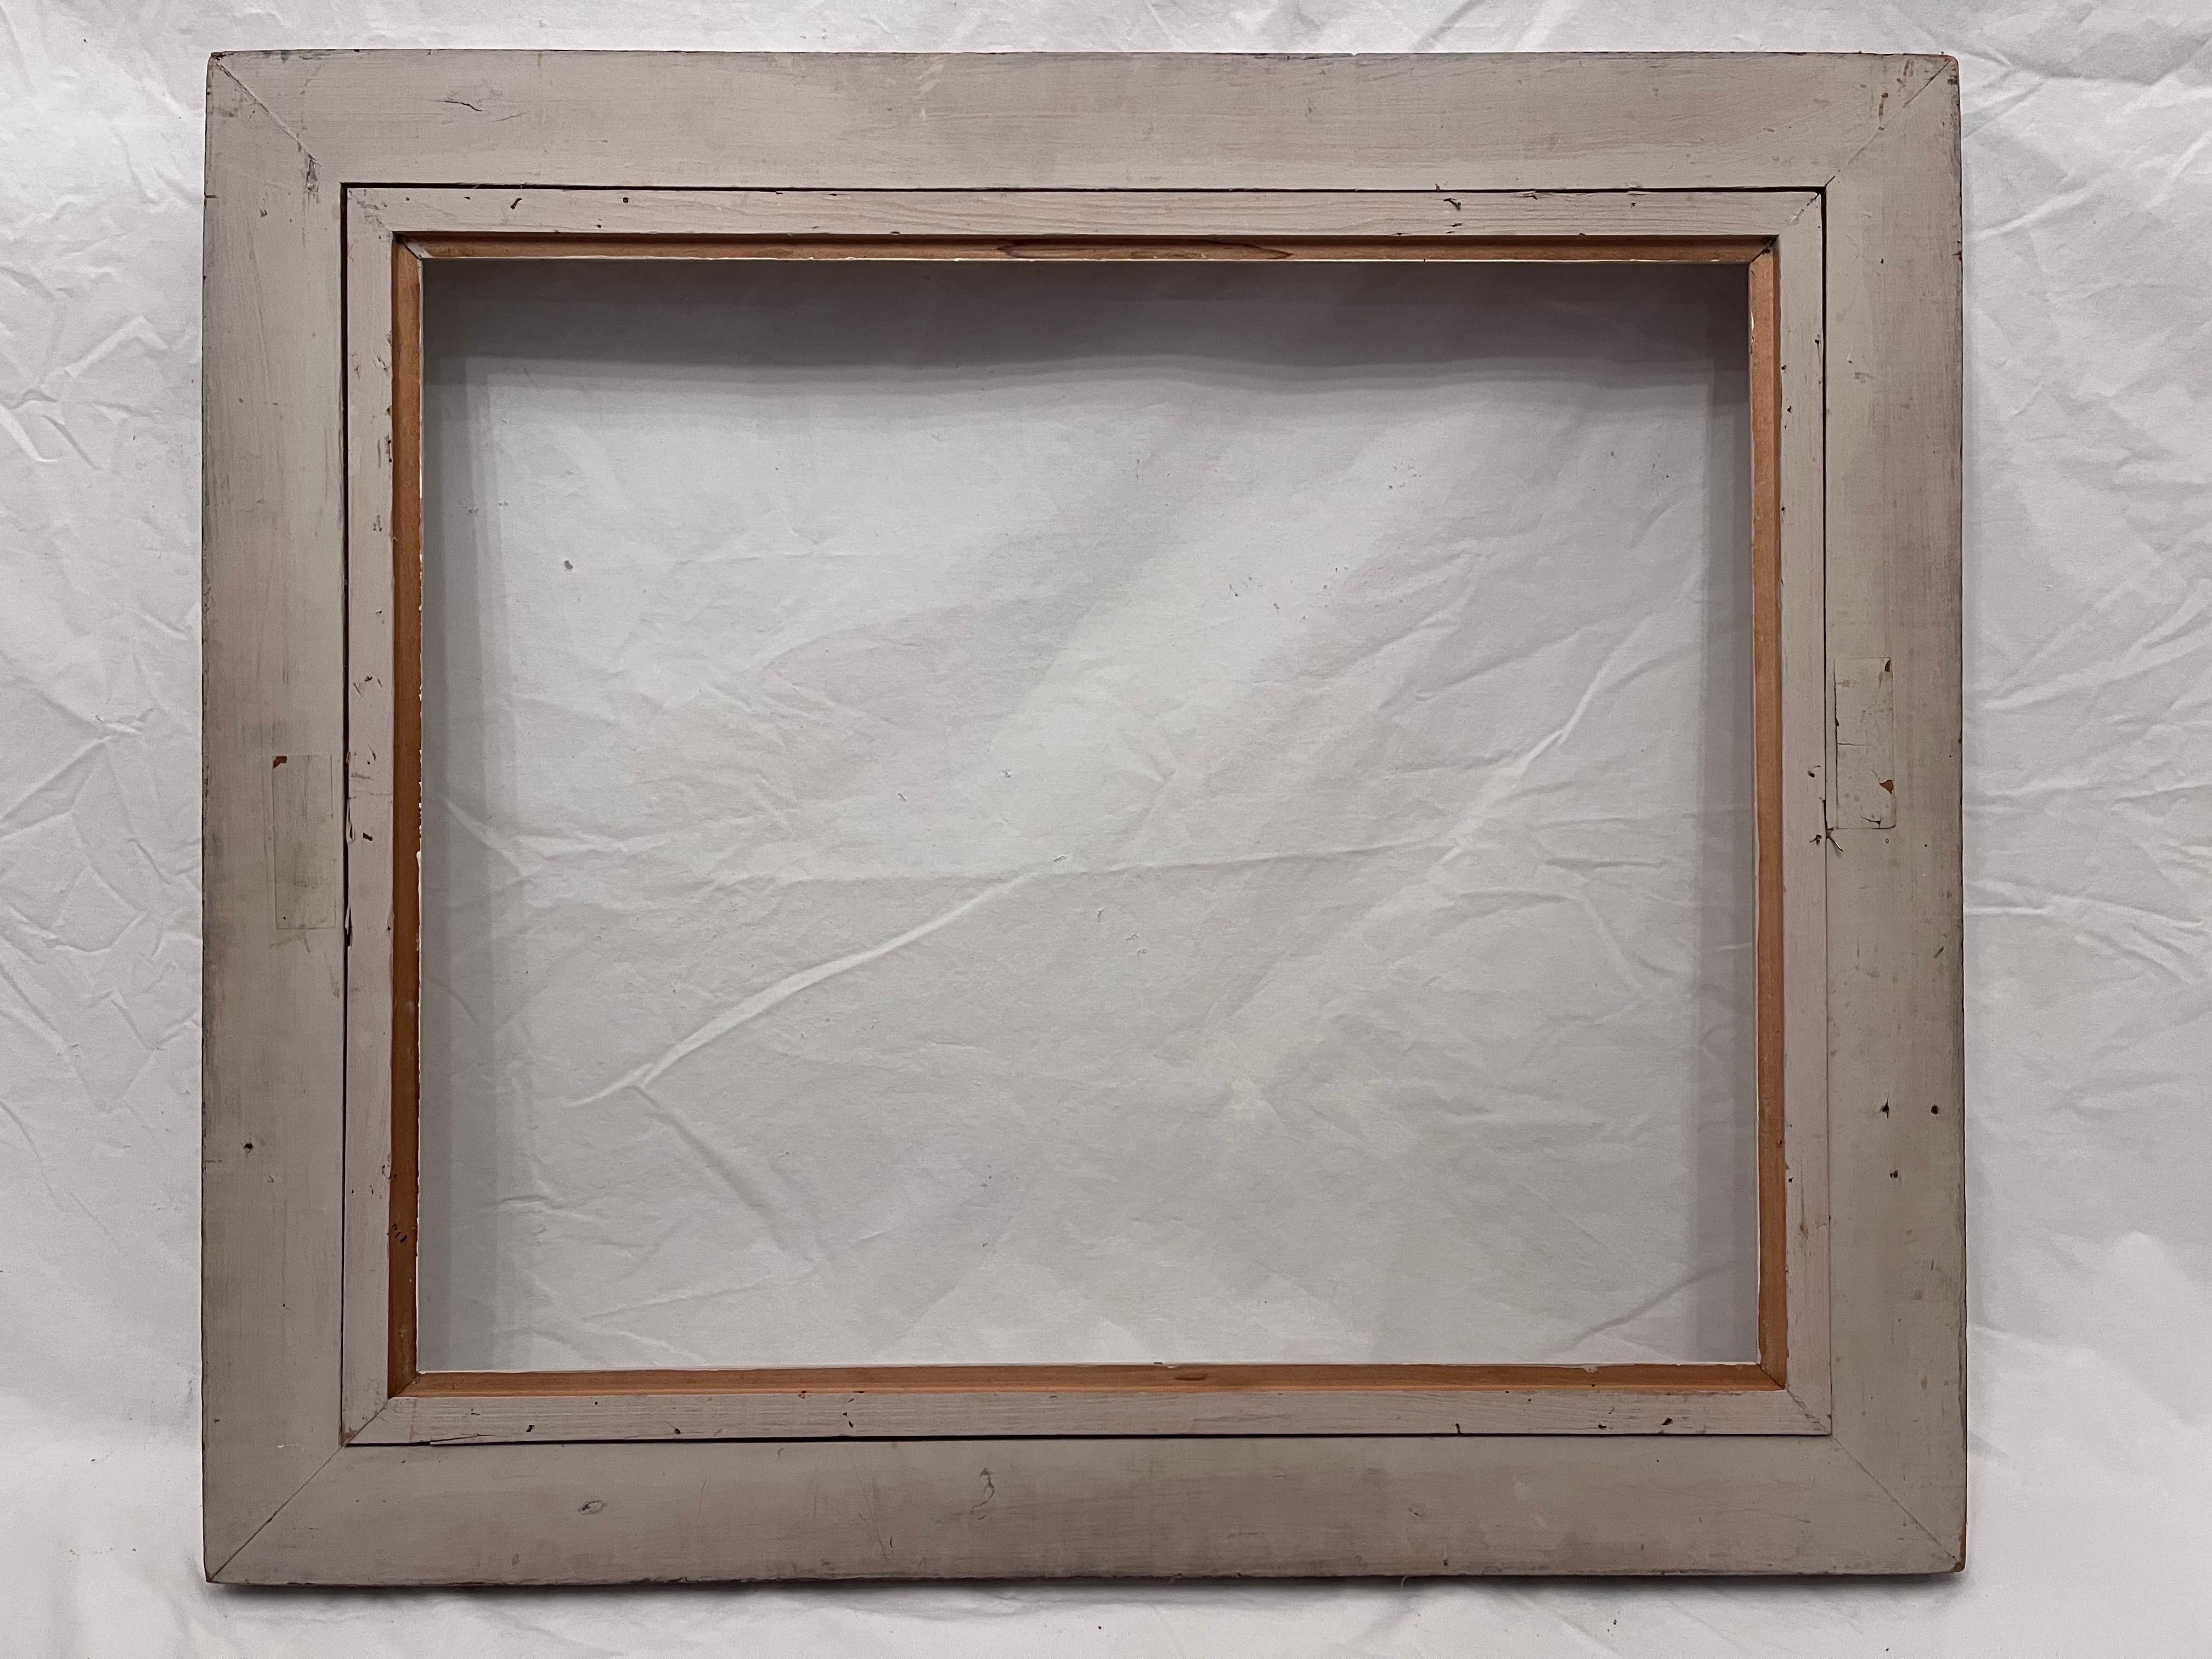 Mid 20th Century American Modernist Style White Finish Picture Frame 24 x 20 1